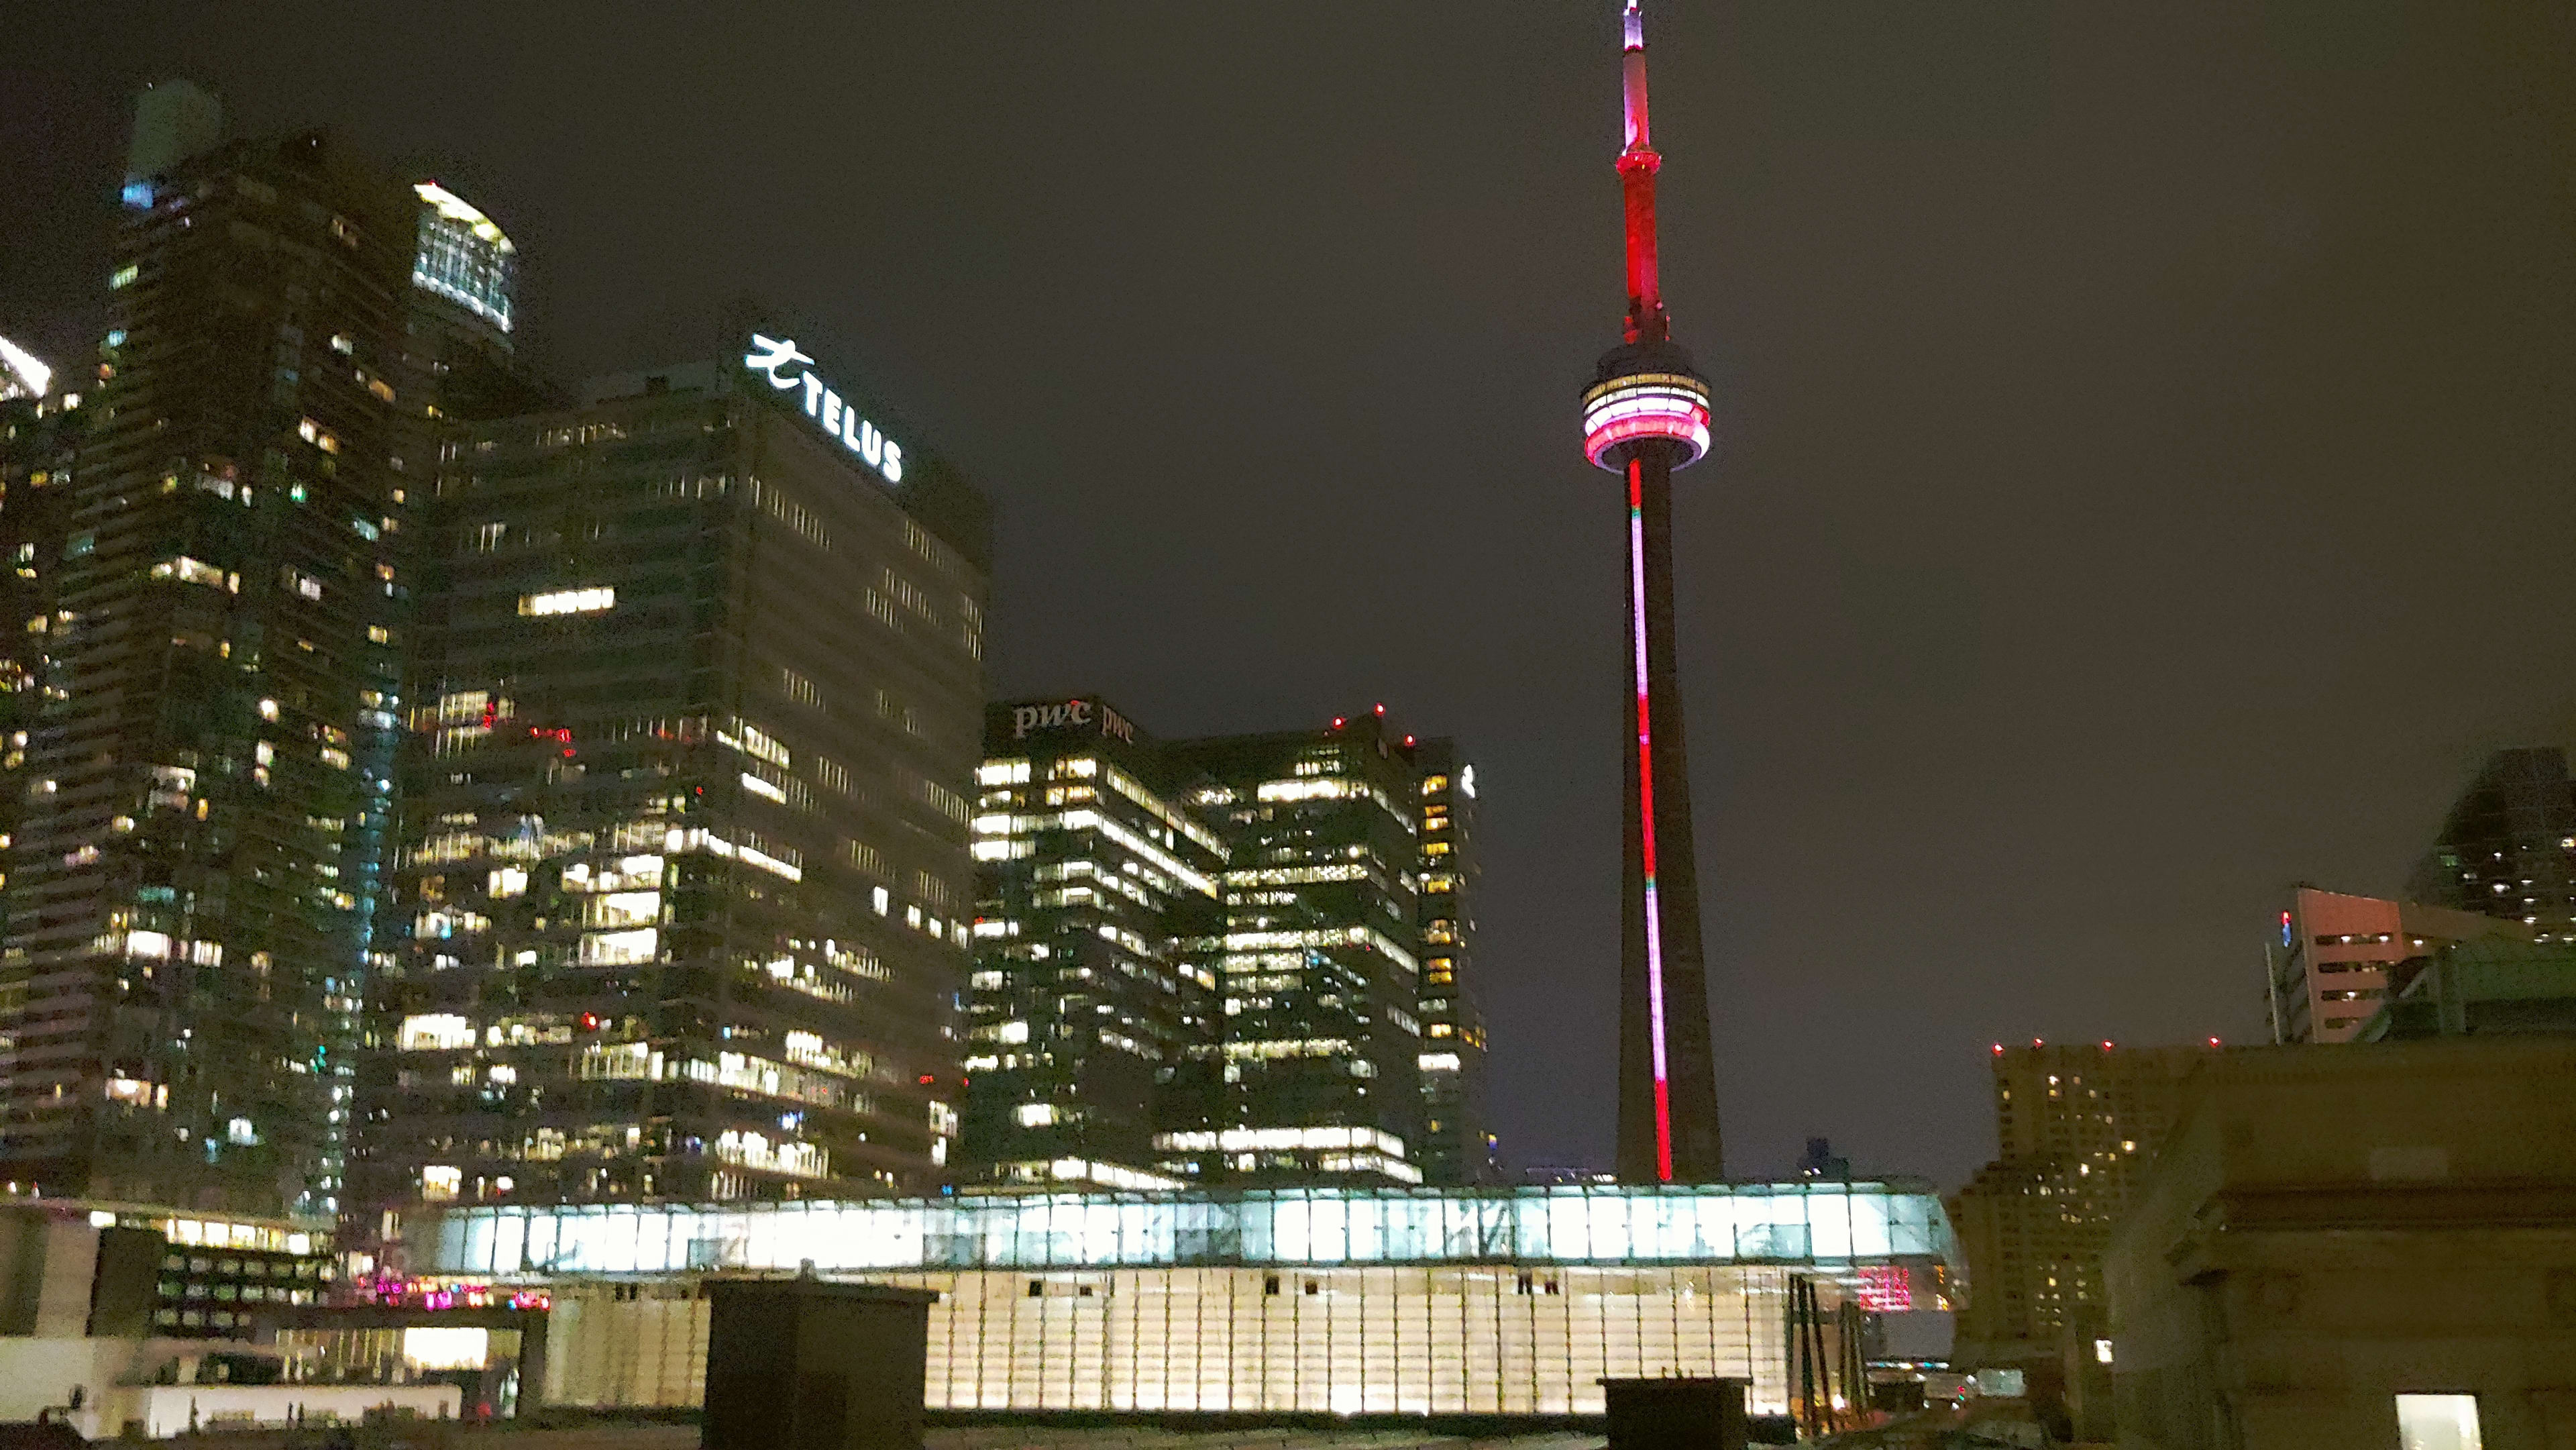 Union Station at night, with the CN Tower behind.